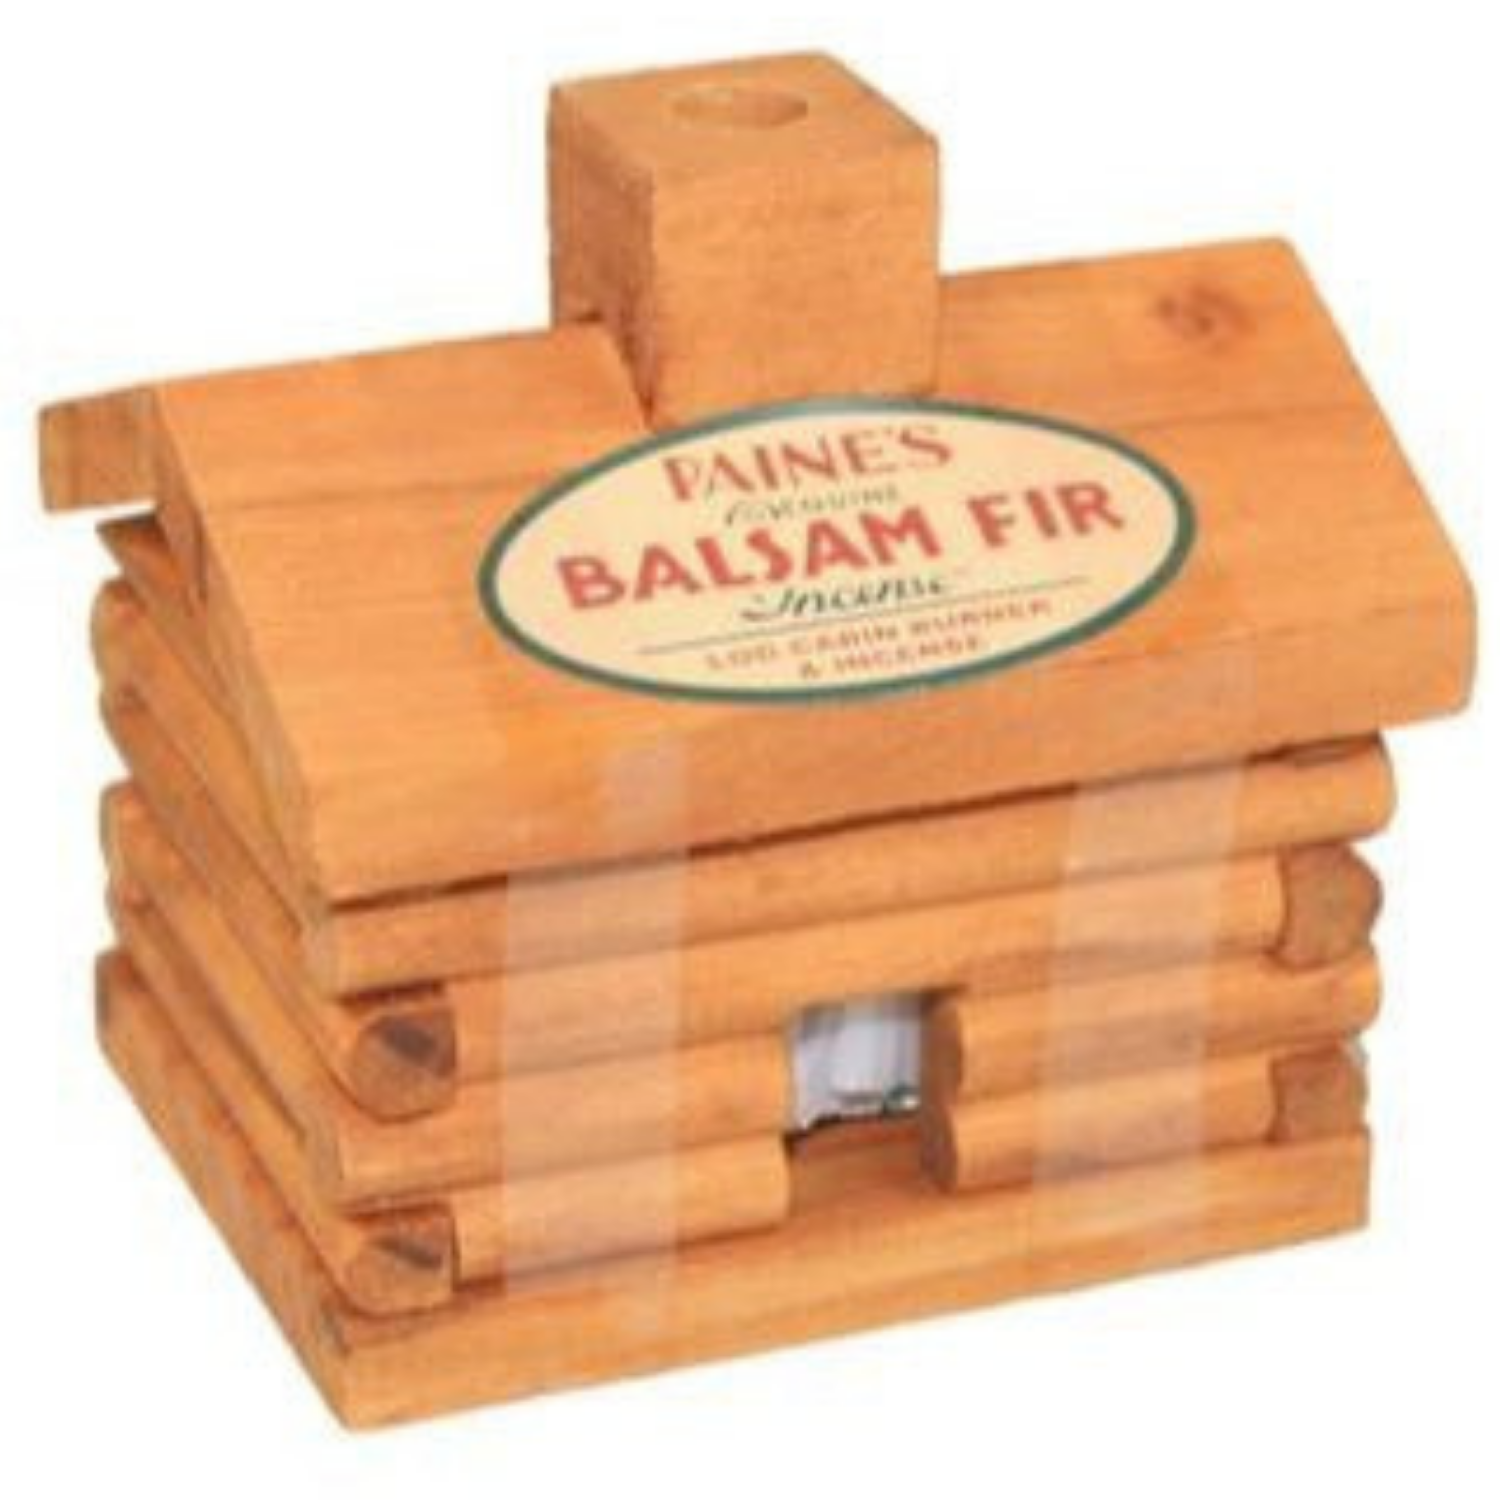 Paine's Cabin Burner With 10 Fir Balsam Incense Logs